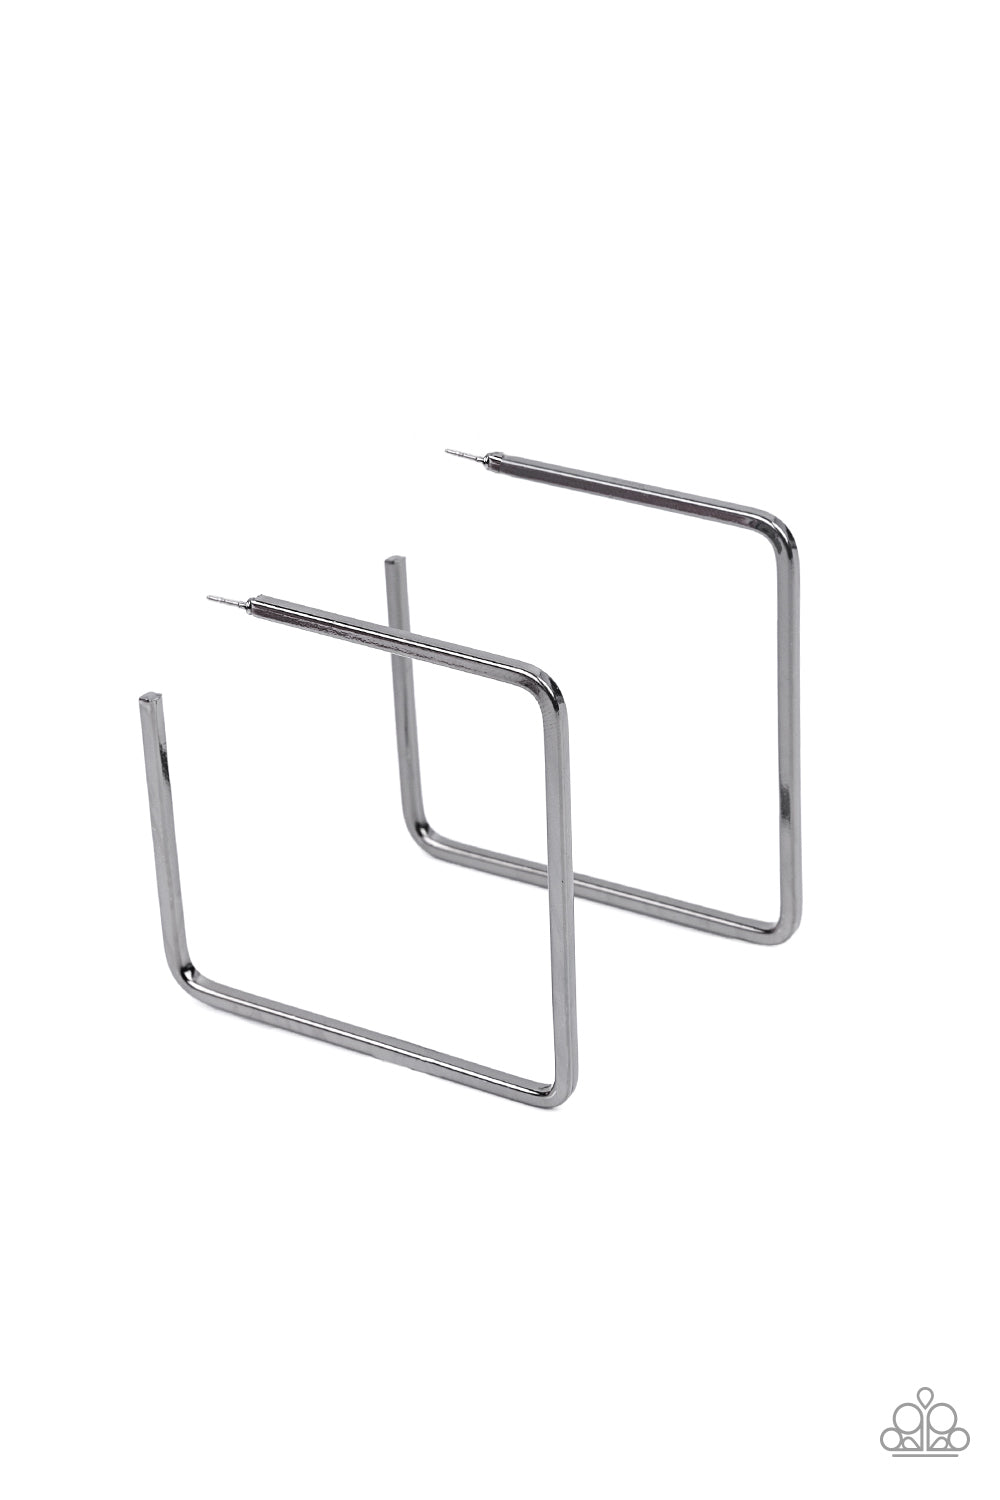 A deceptively simple square frame is tilted on point to create a geometric hoop. Its sharp angles are complemented by its rich gunmetal finish, making a lasting impression. Earring attaches to a standard post fitting. Hoop measures approximately 2